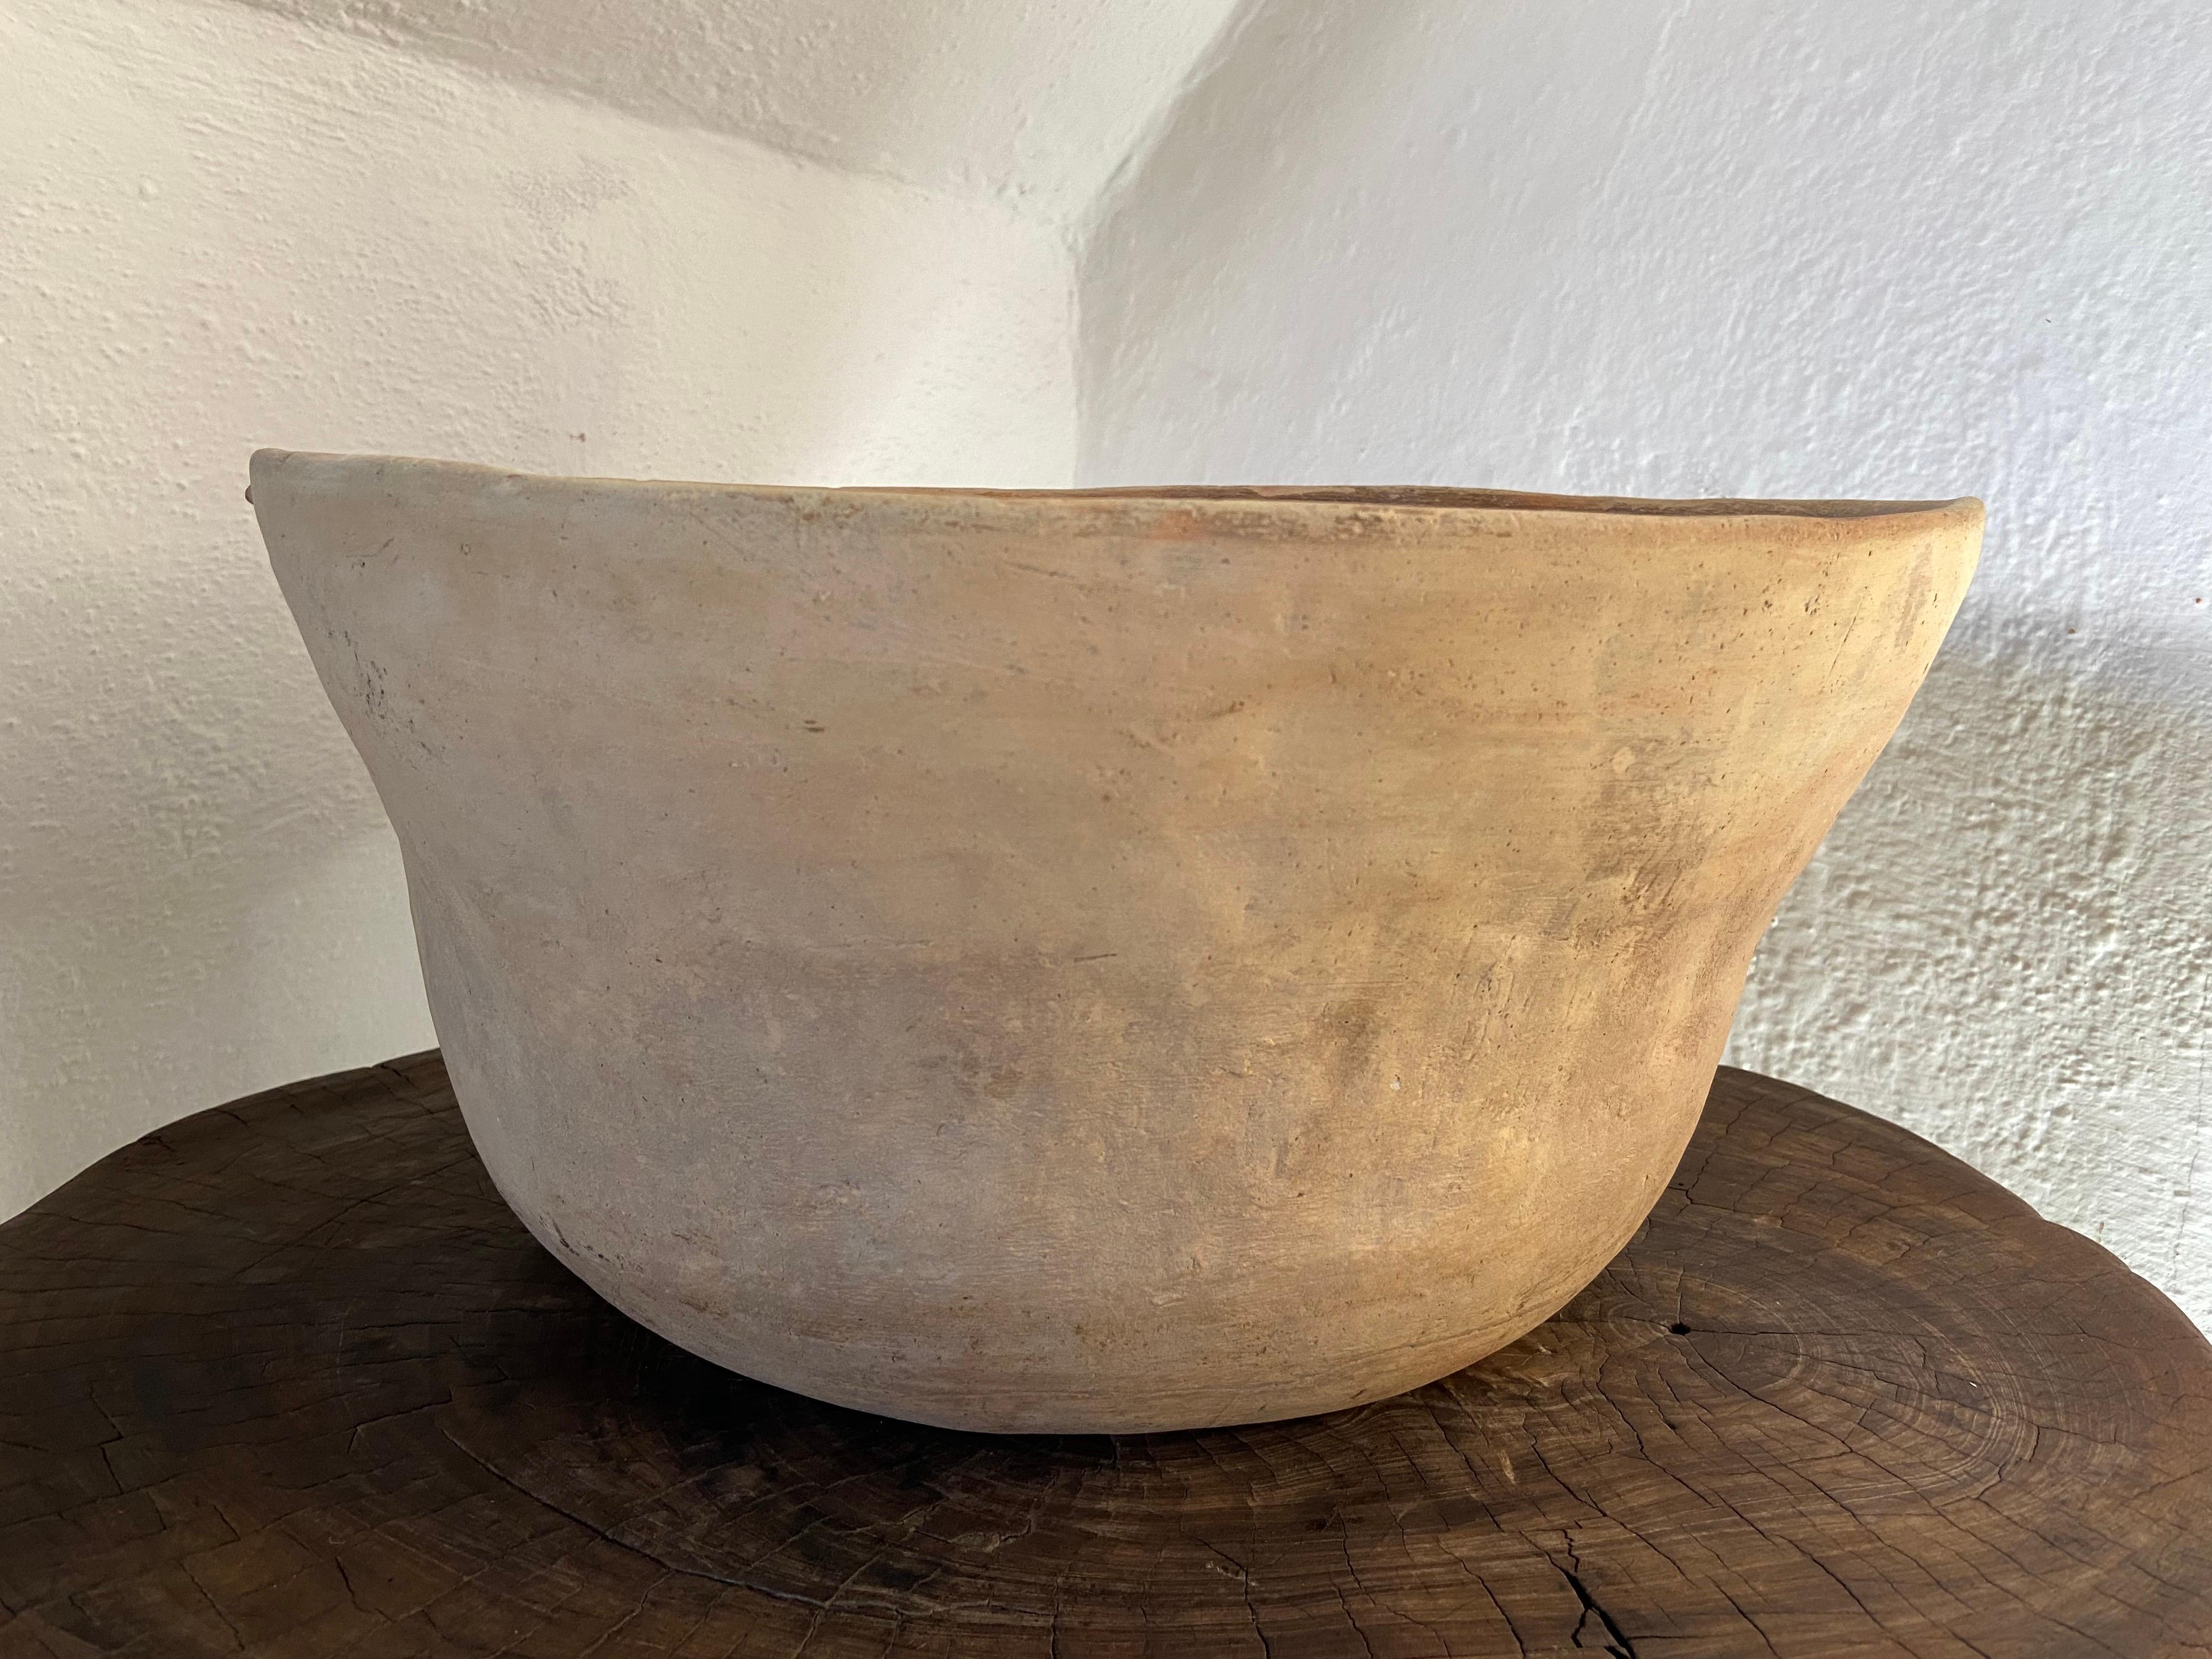 Clay Terracotta Bowl from Mexico, Circa 1940's